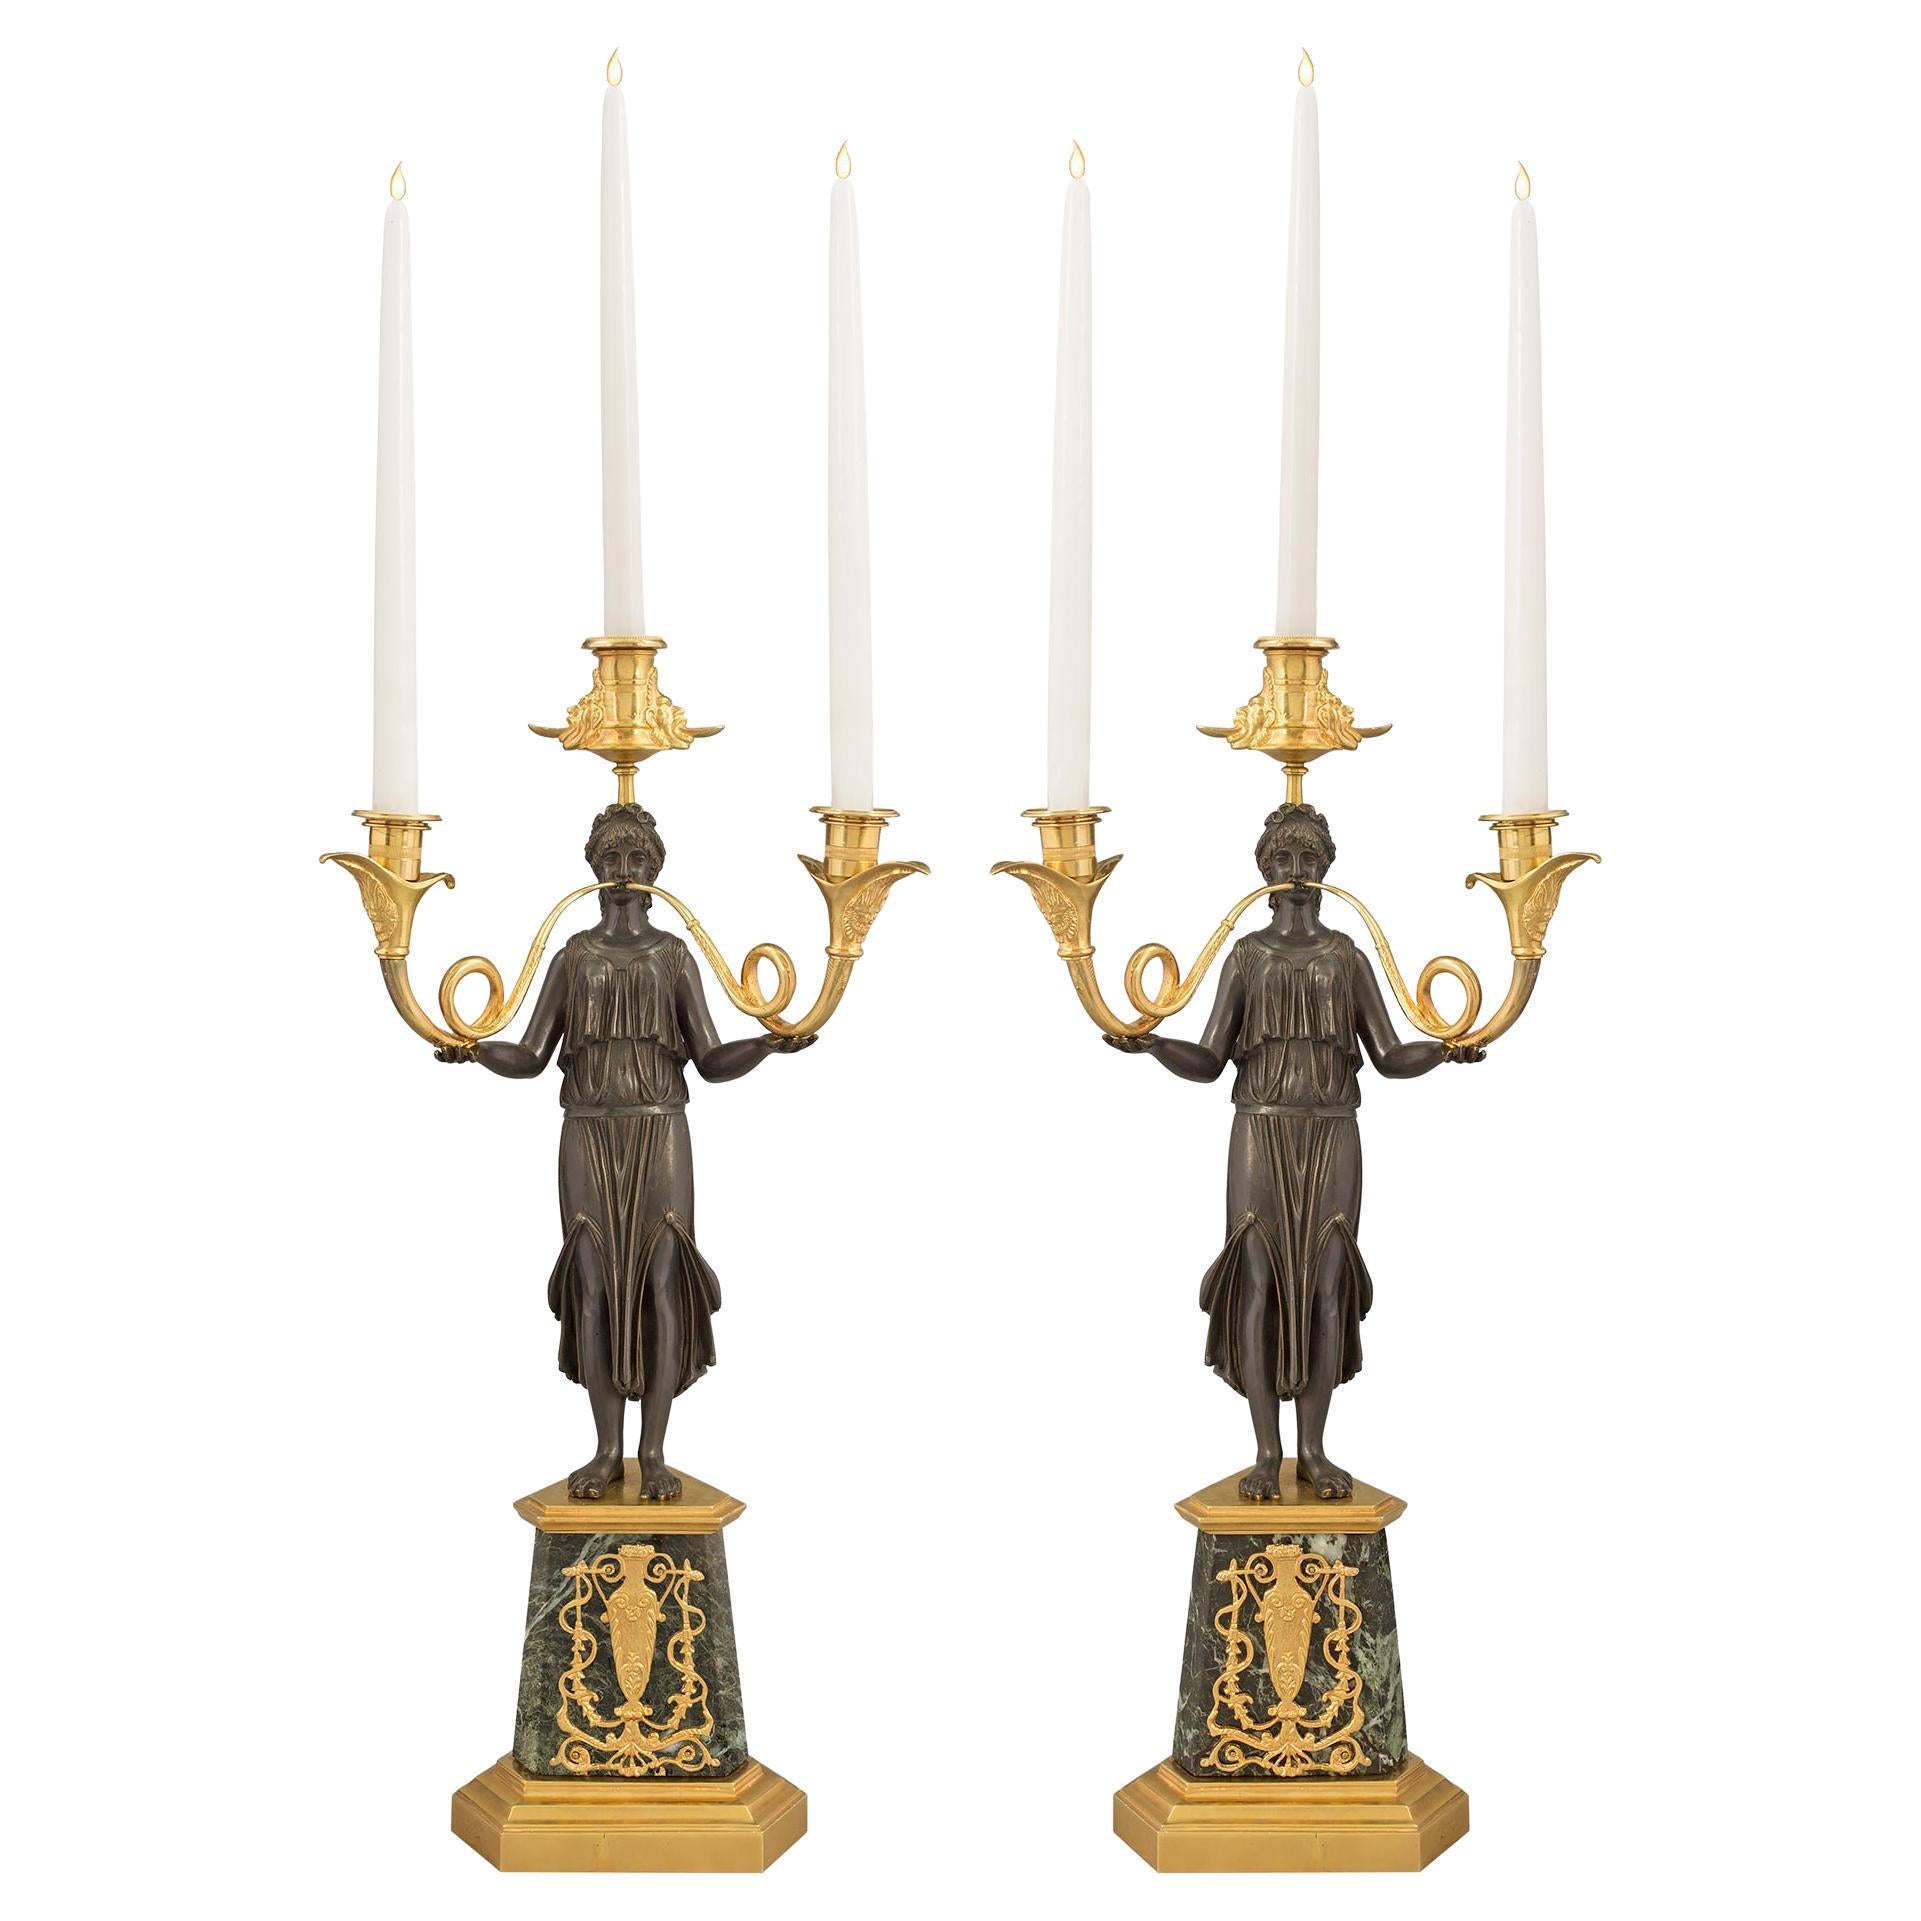 Pair of French 19th Century Neo-Classical St. Candelabras